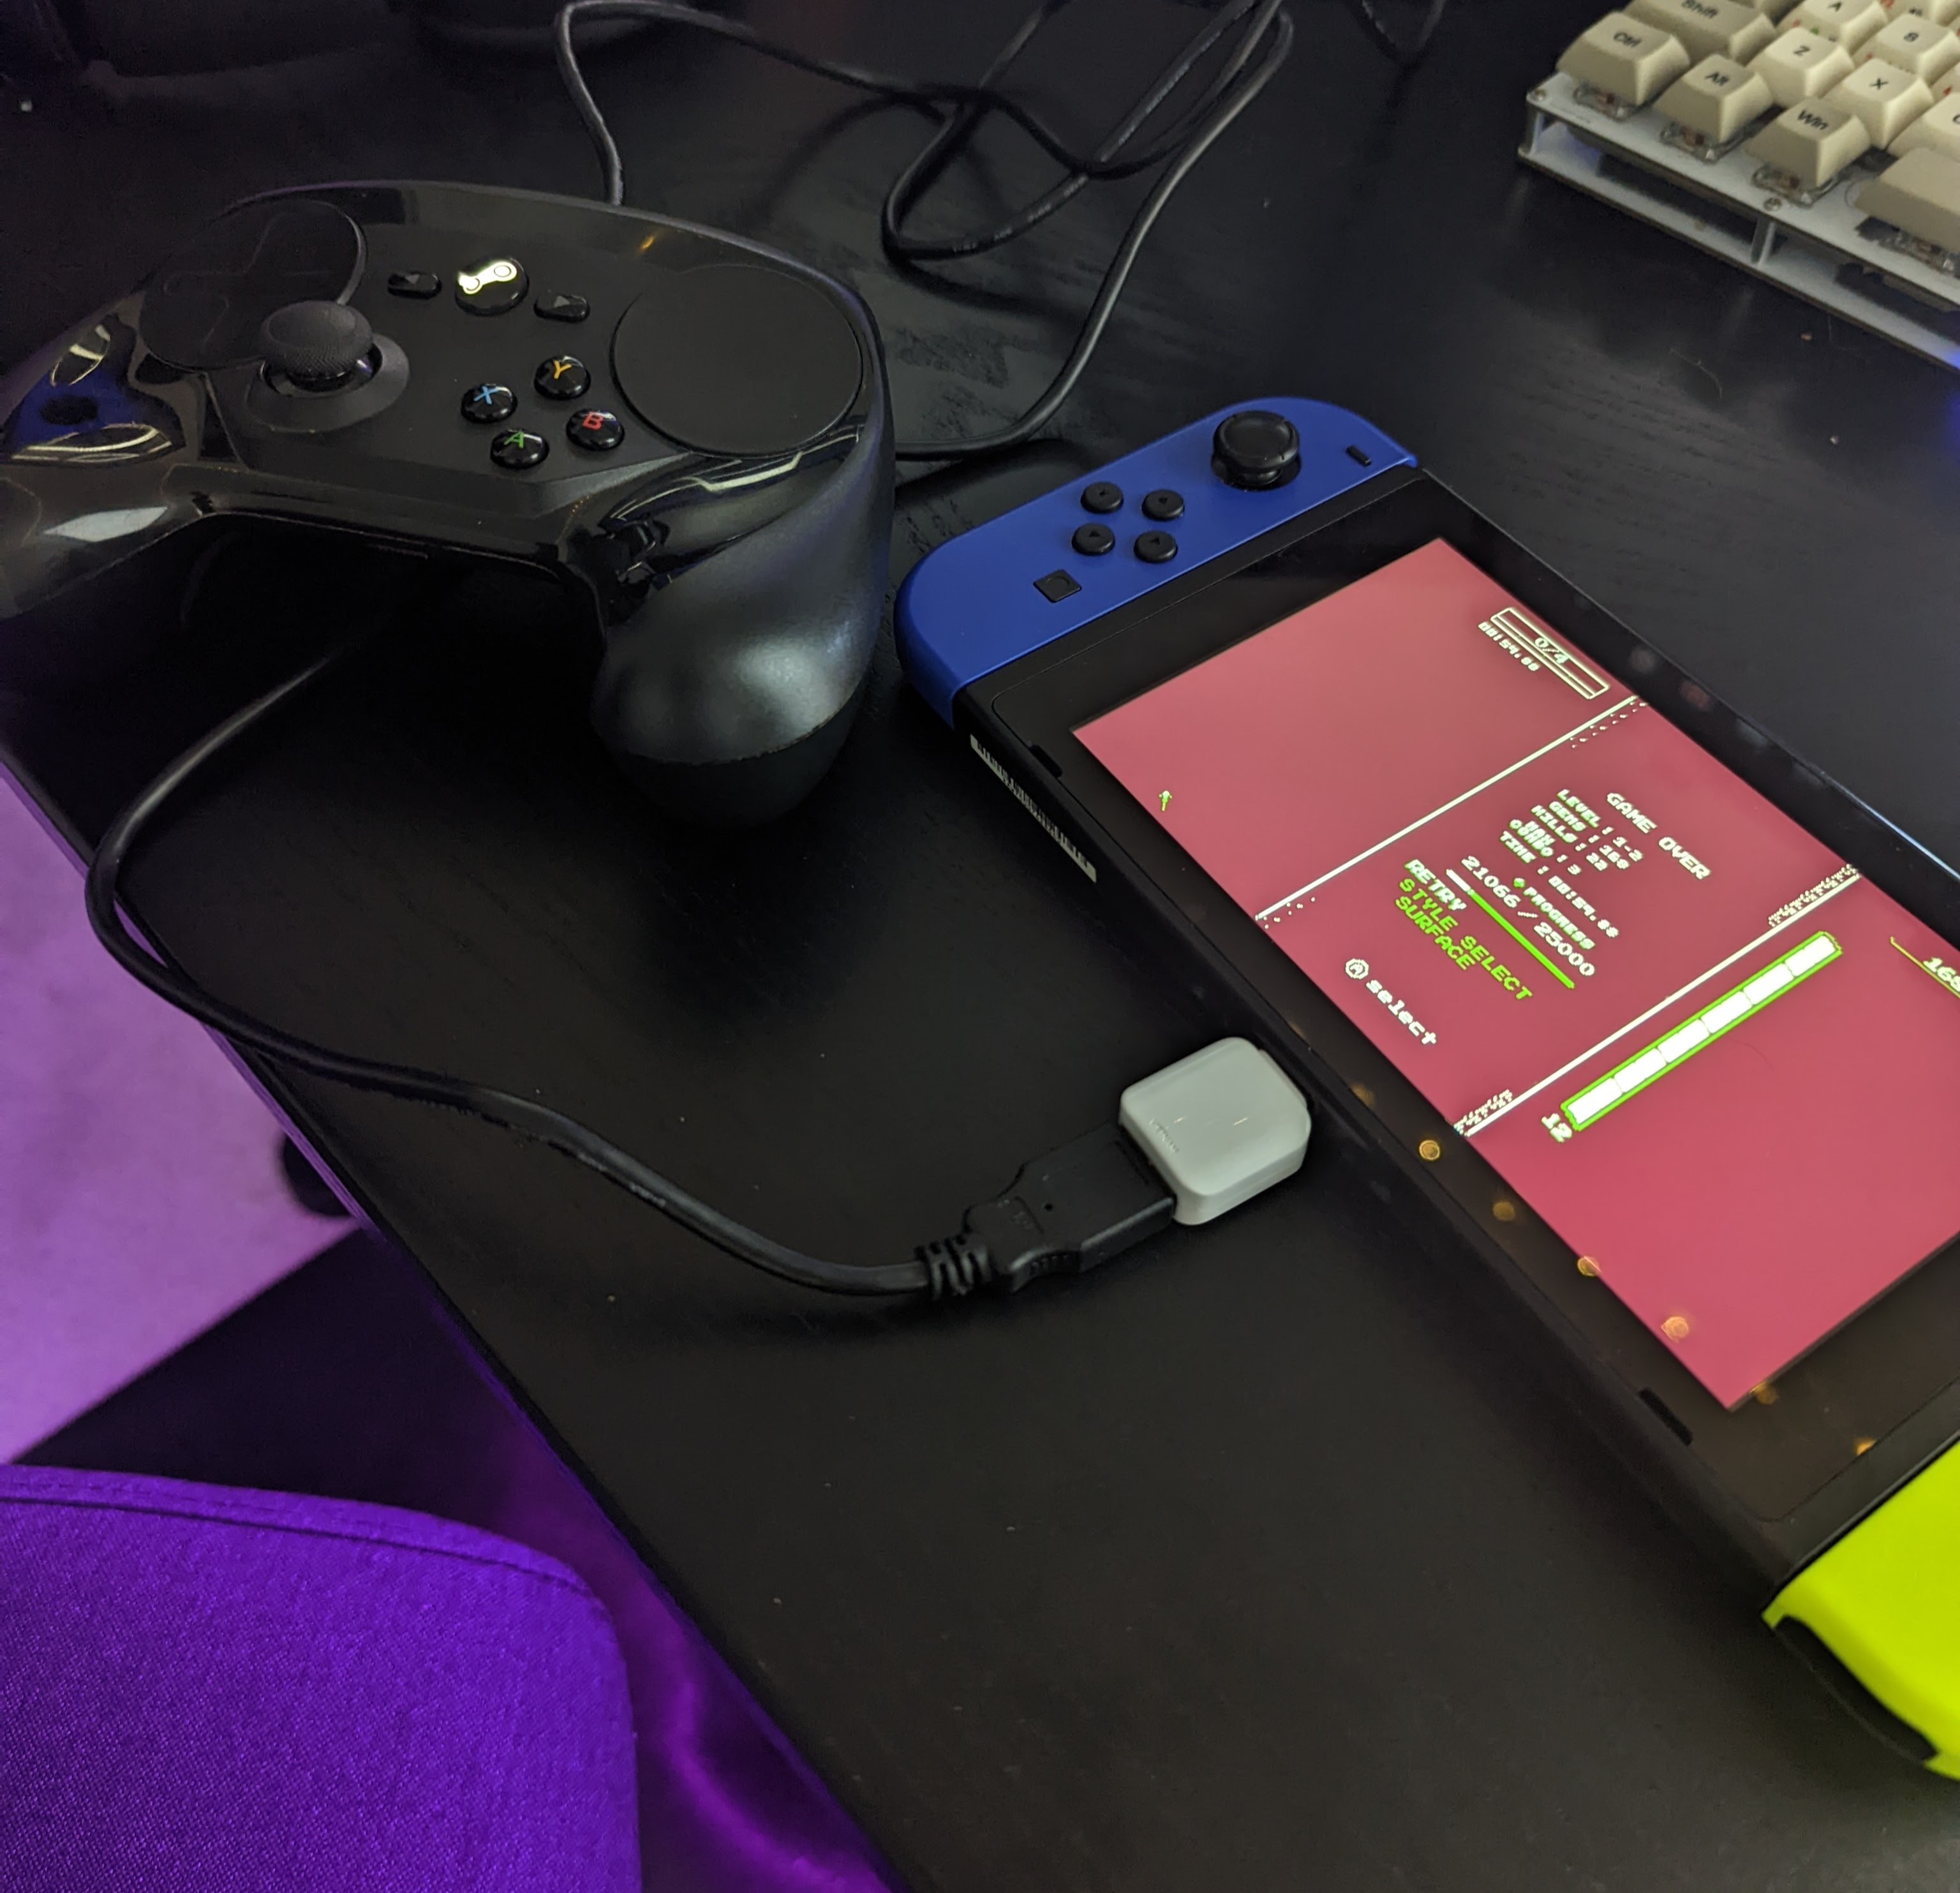 My steam controller plugged into a switch